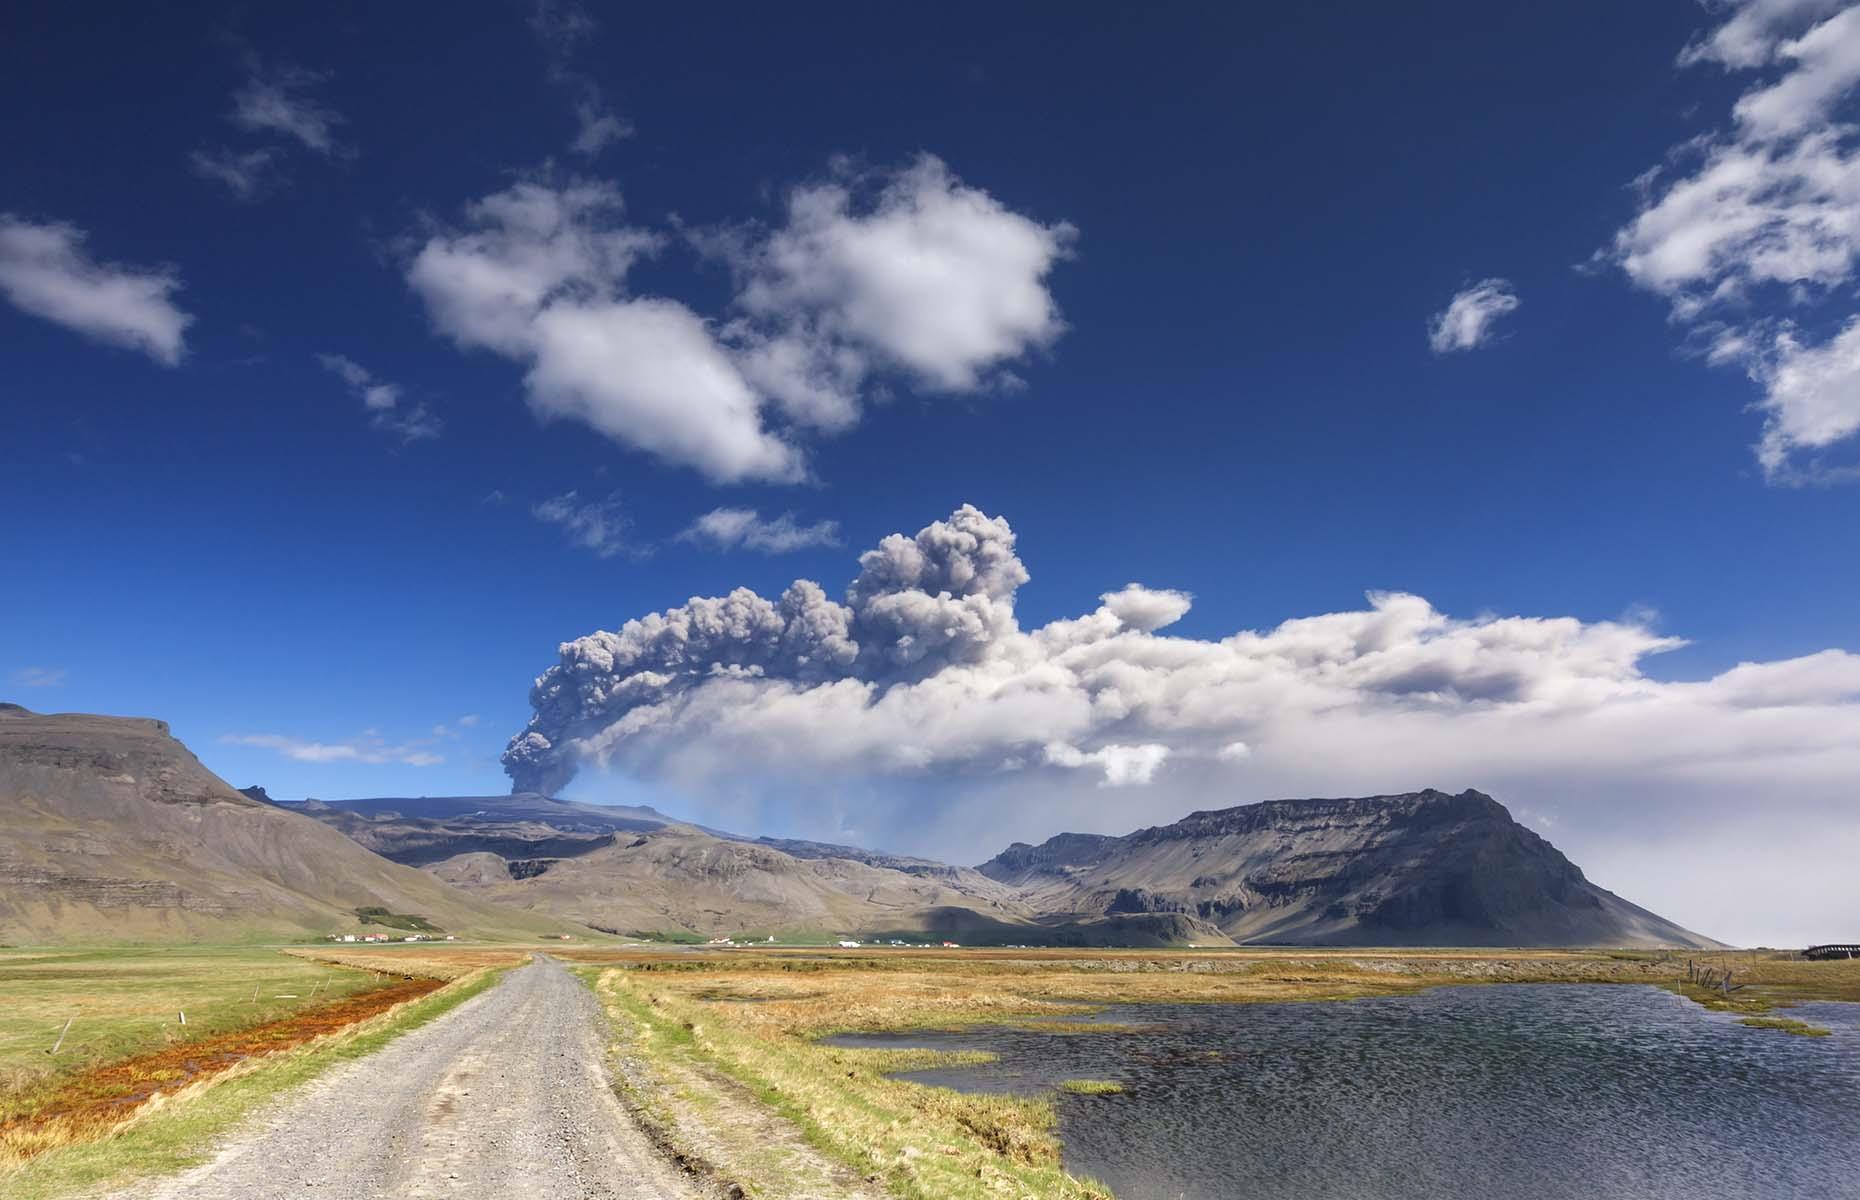 <p>In 2010, newsreaders around the world struggled to pronounce the name of the Icelandic glacier volcano that brought air traffic in Europe to a standstill. <a href="https://www.bgs.ac.uk/research/volcanoes/icelandic_ash.html">Eyjafjallajökull belched out huge ash clouds</a> that hung in the air for more than six days. </p>